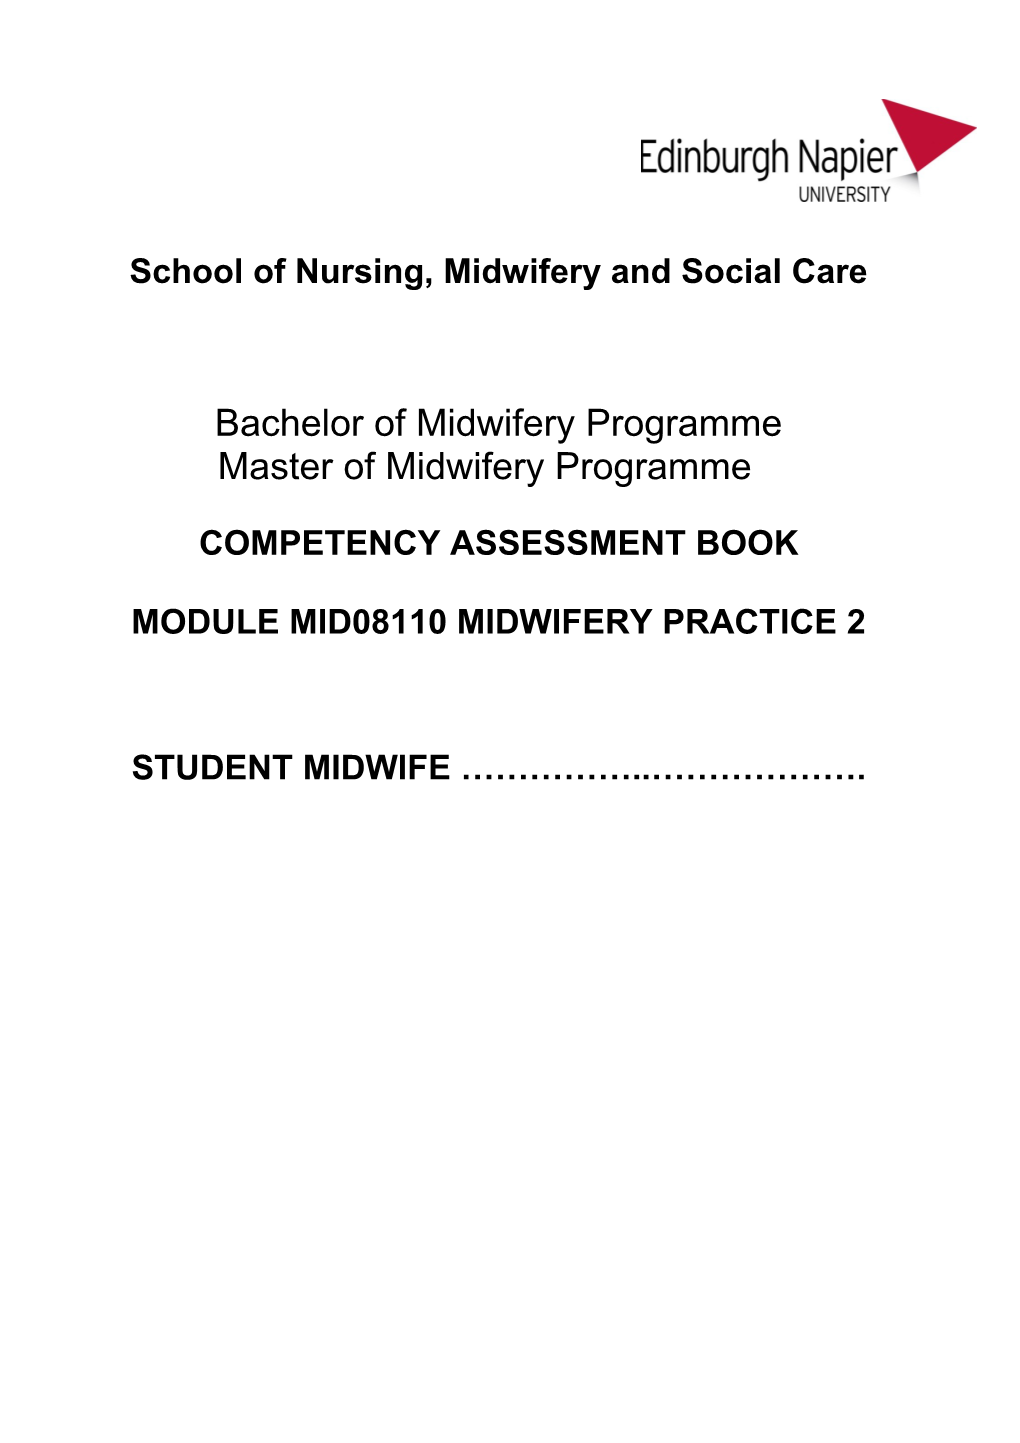 New Curric 2016 Midwifery Practice 2